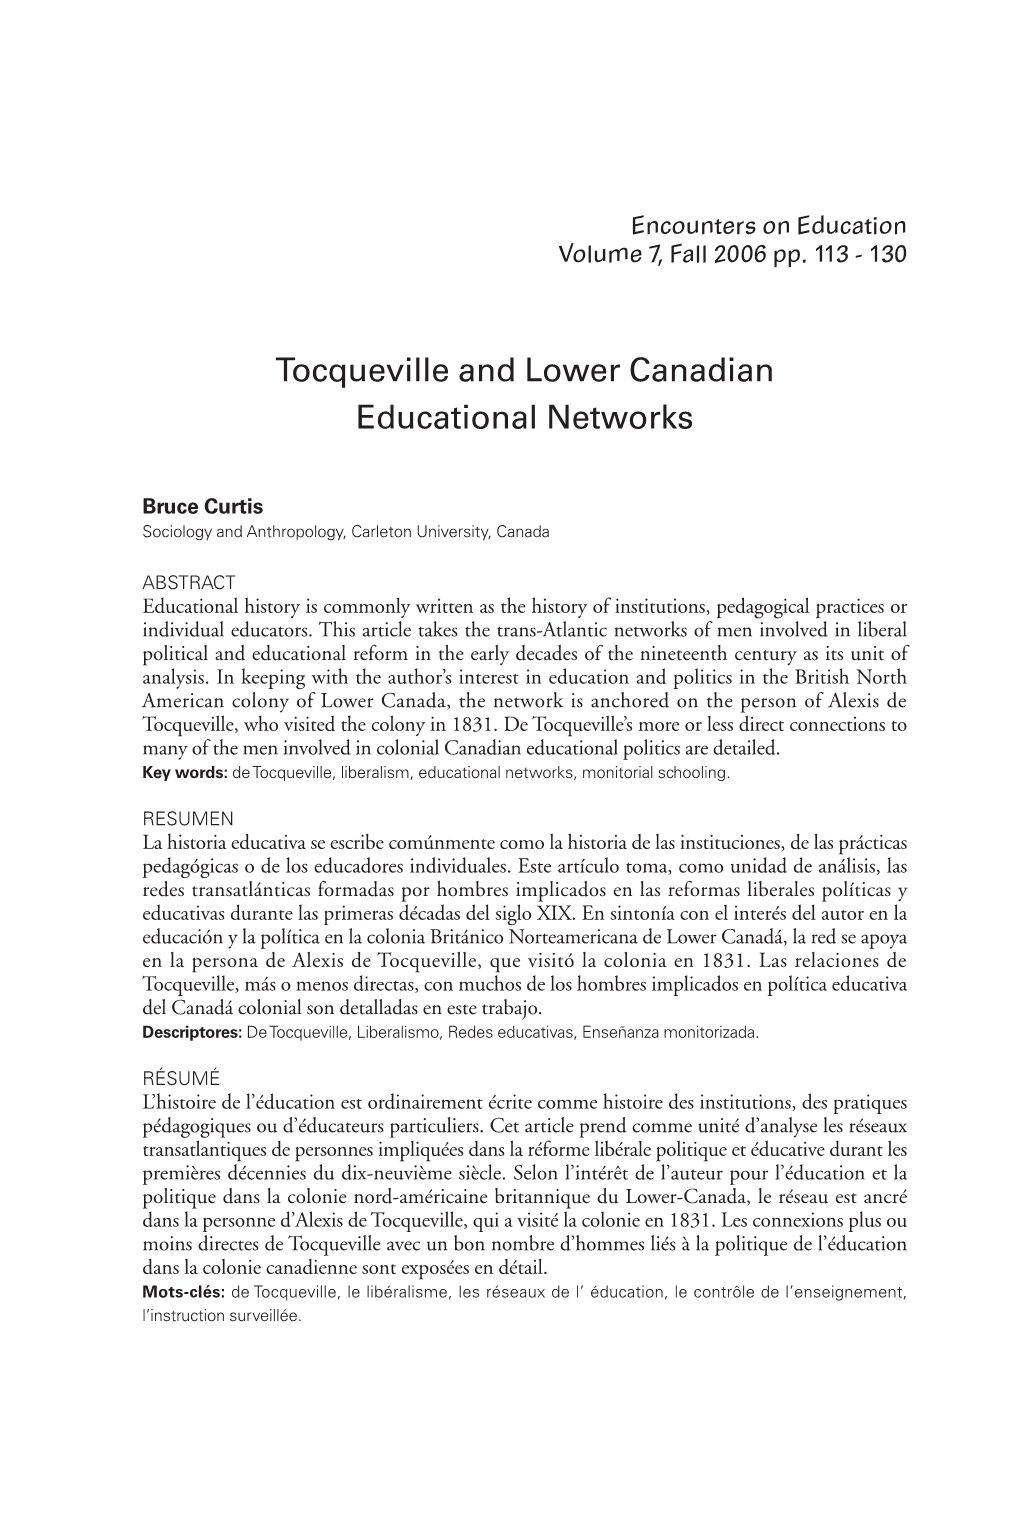 Tocqueville and Lower Canadian Educational Networks